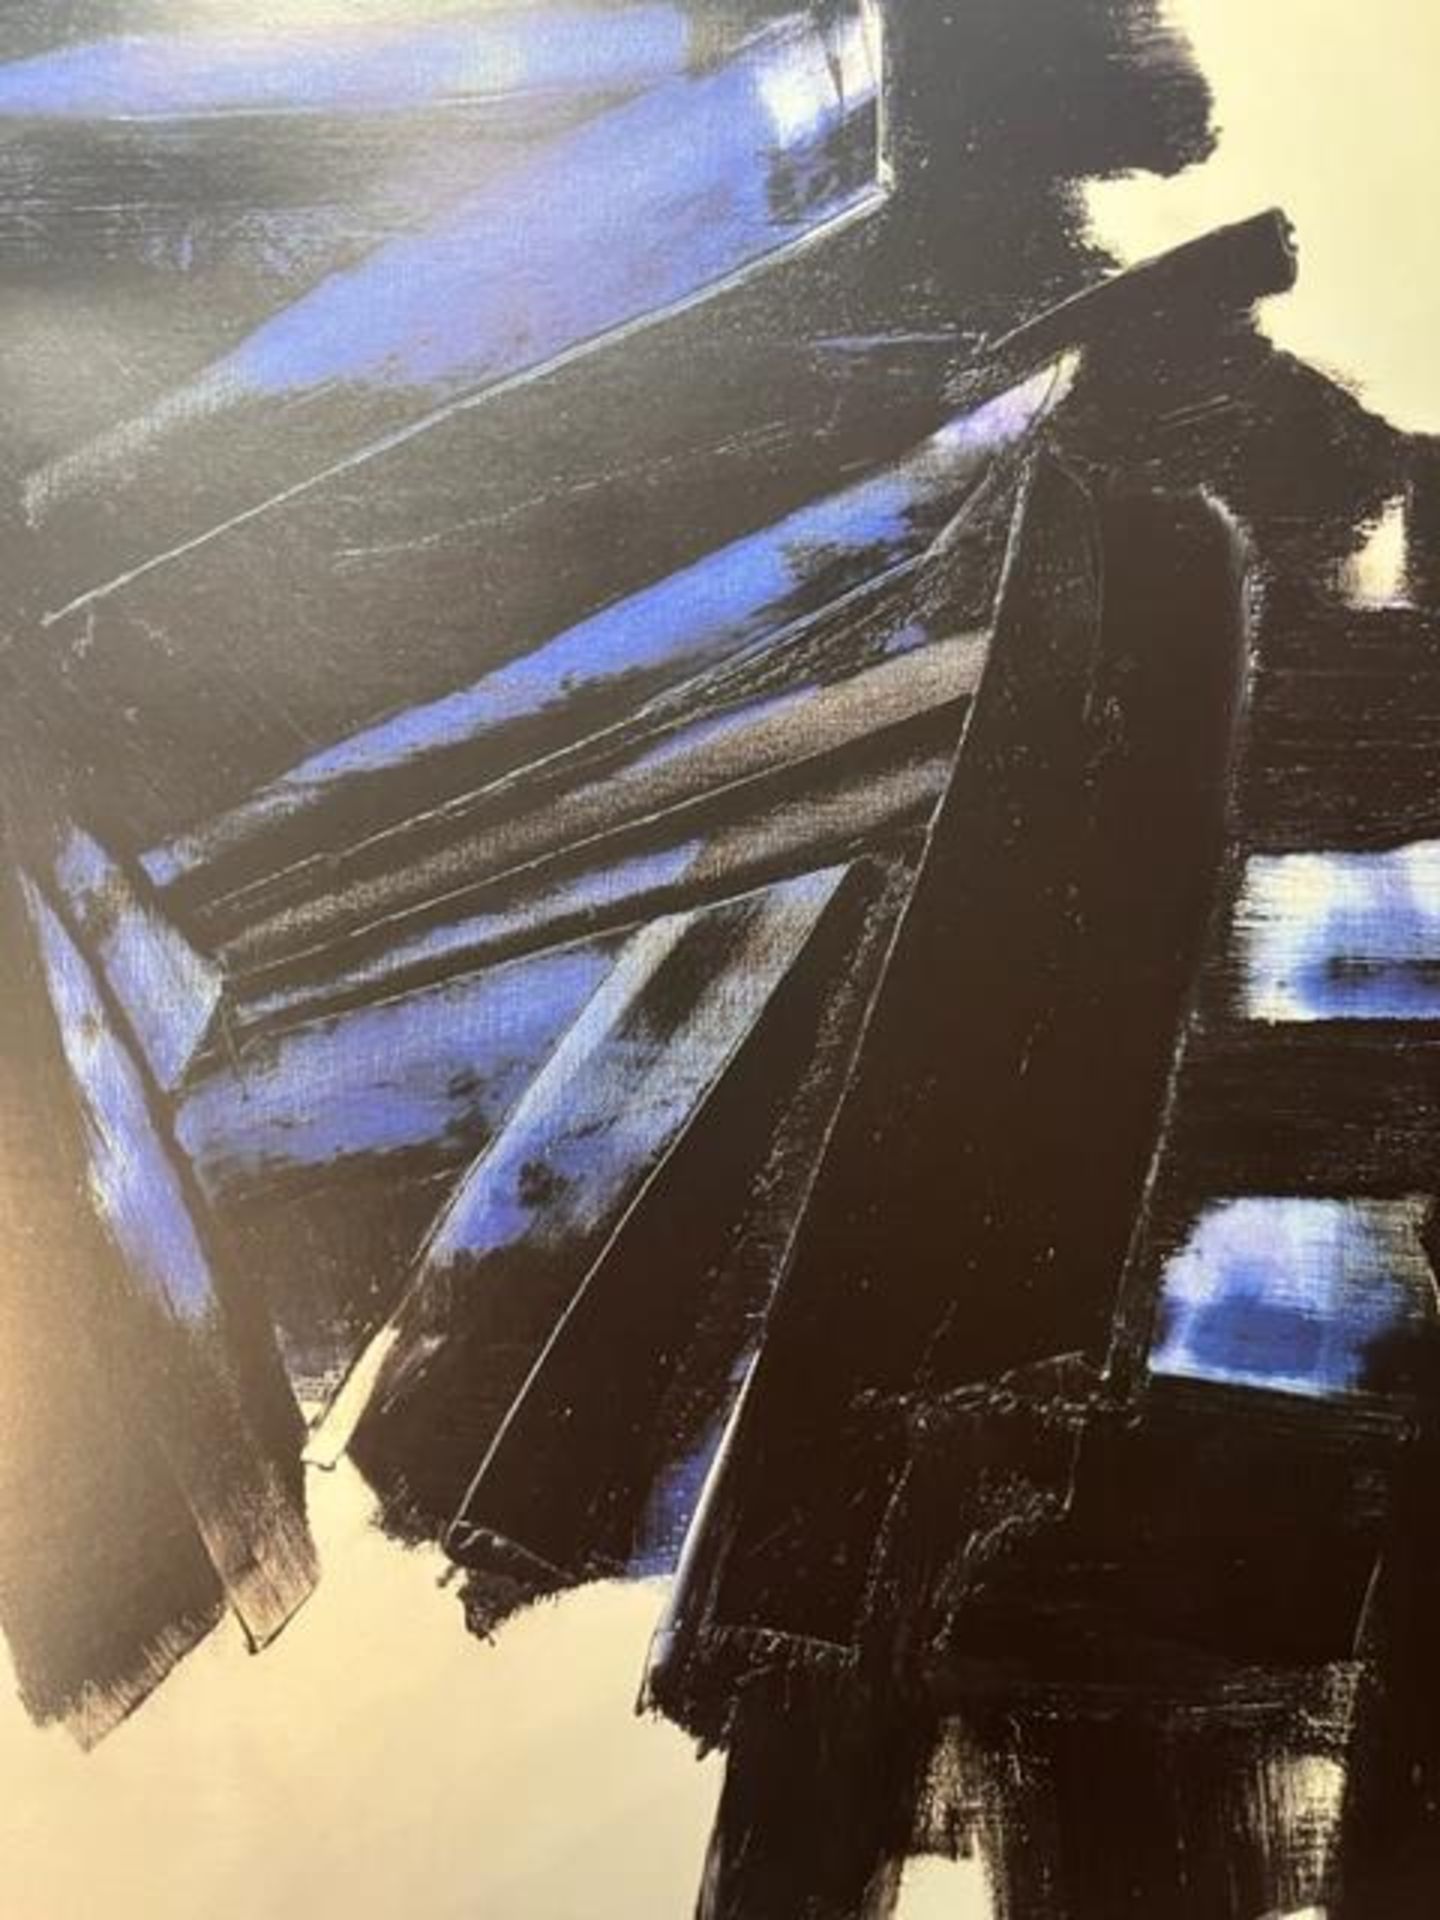 Pierre Soulages "Untitled" Print. - Image 3 of 6